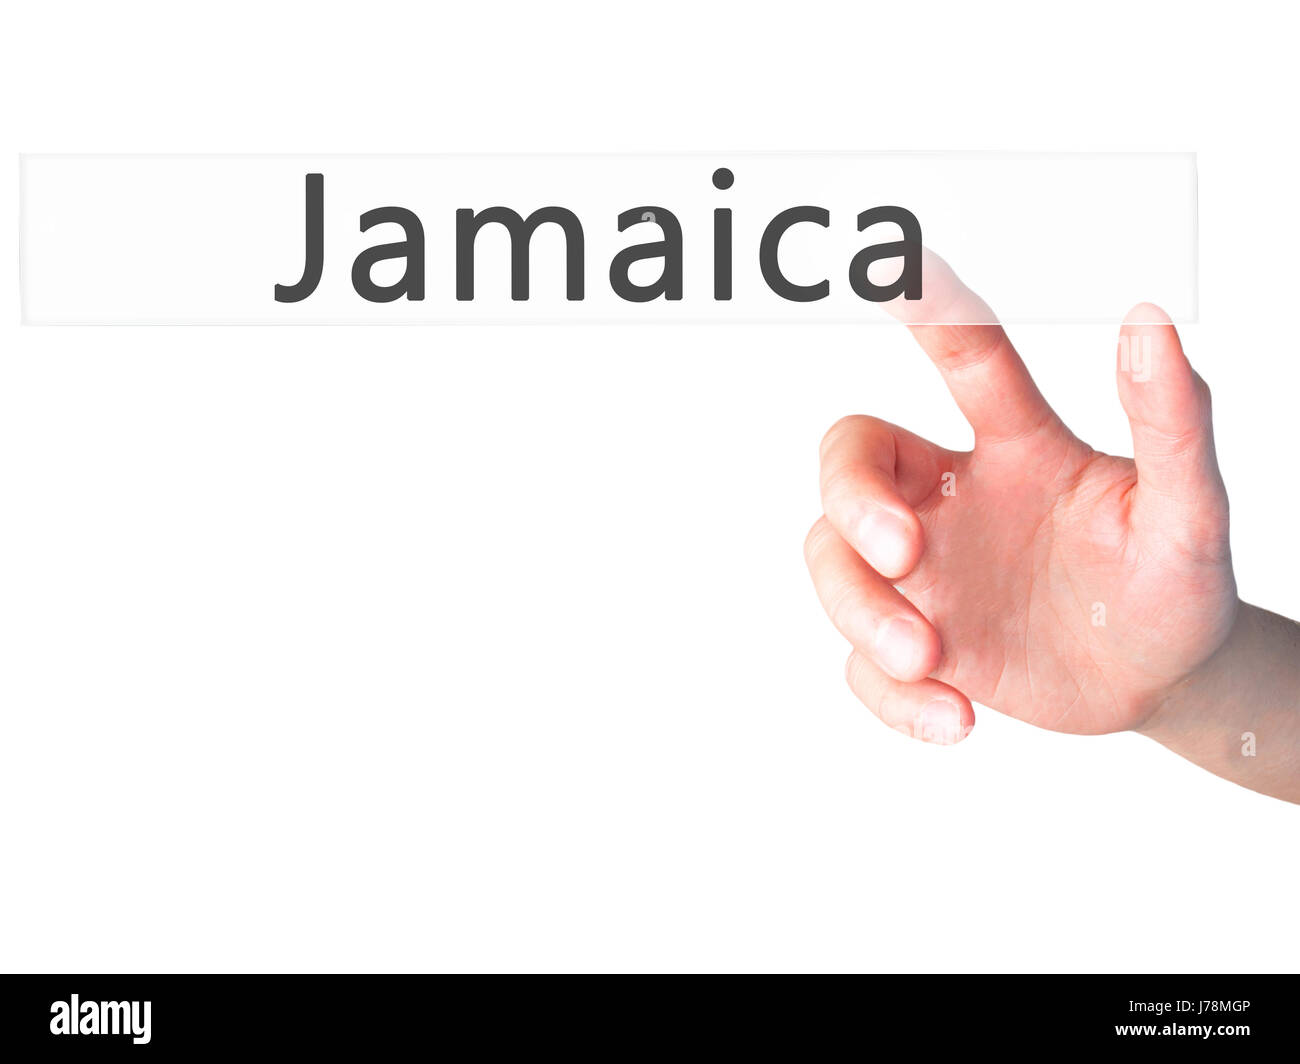 Jamaica - Hand pressing a button on blurred background concept . Business, technology, internet concept. Stock Photo Stock Photo